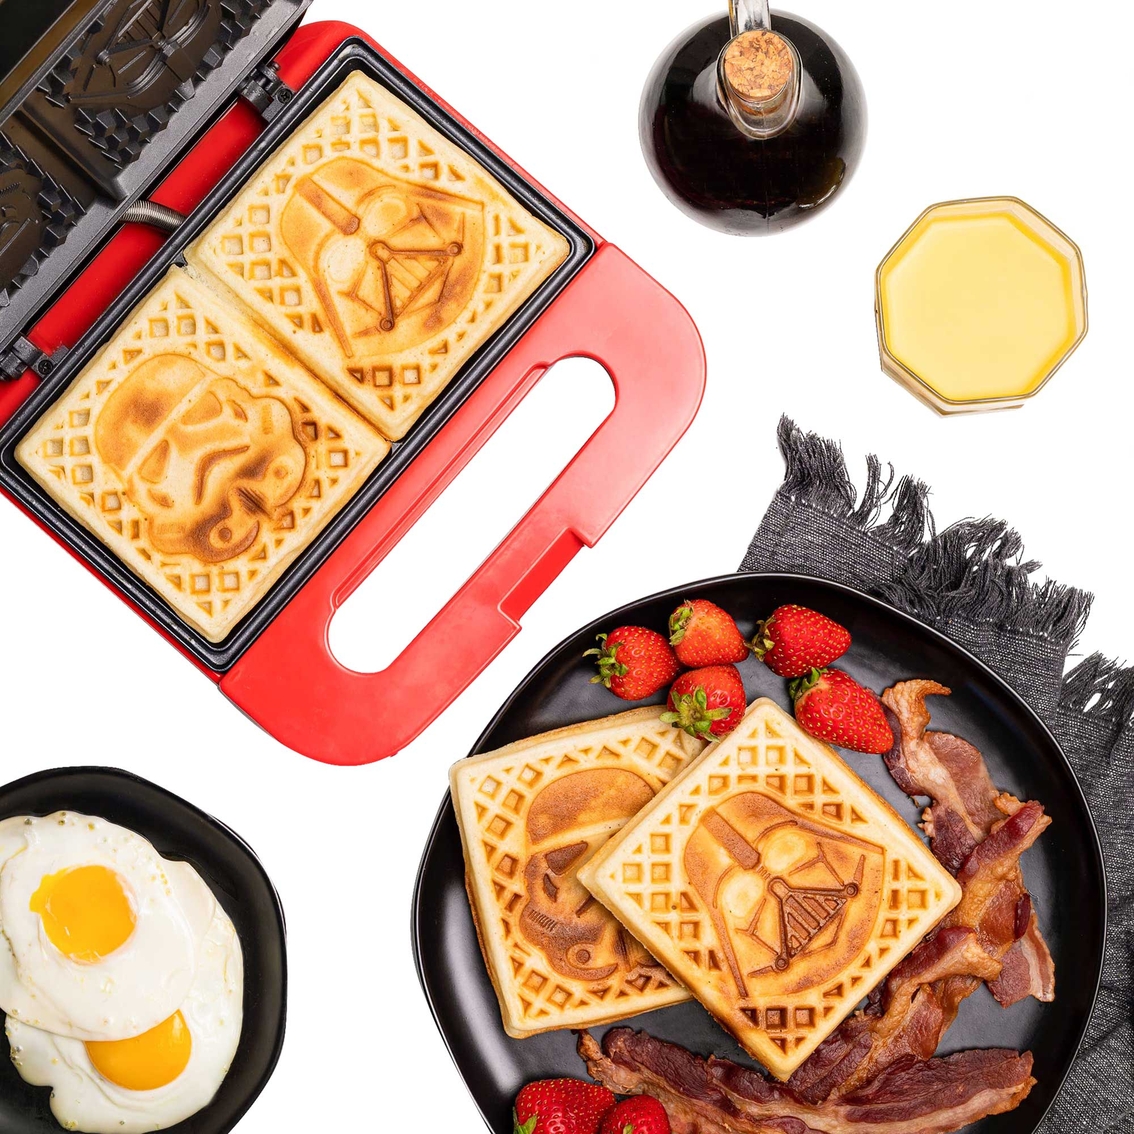 Star Wars Darth Vader and Stormtrooper Double Square Waffle Maker - Image 5 of 6